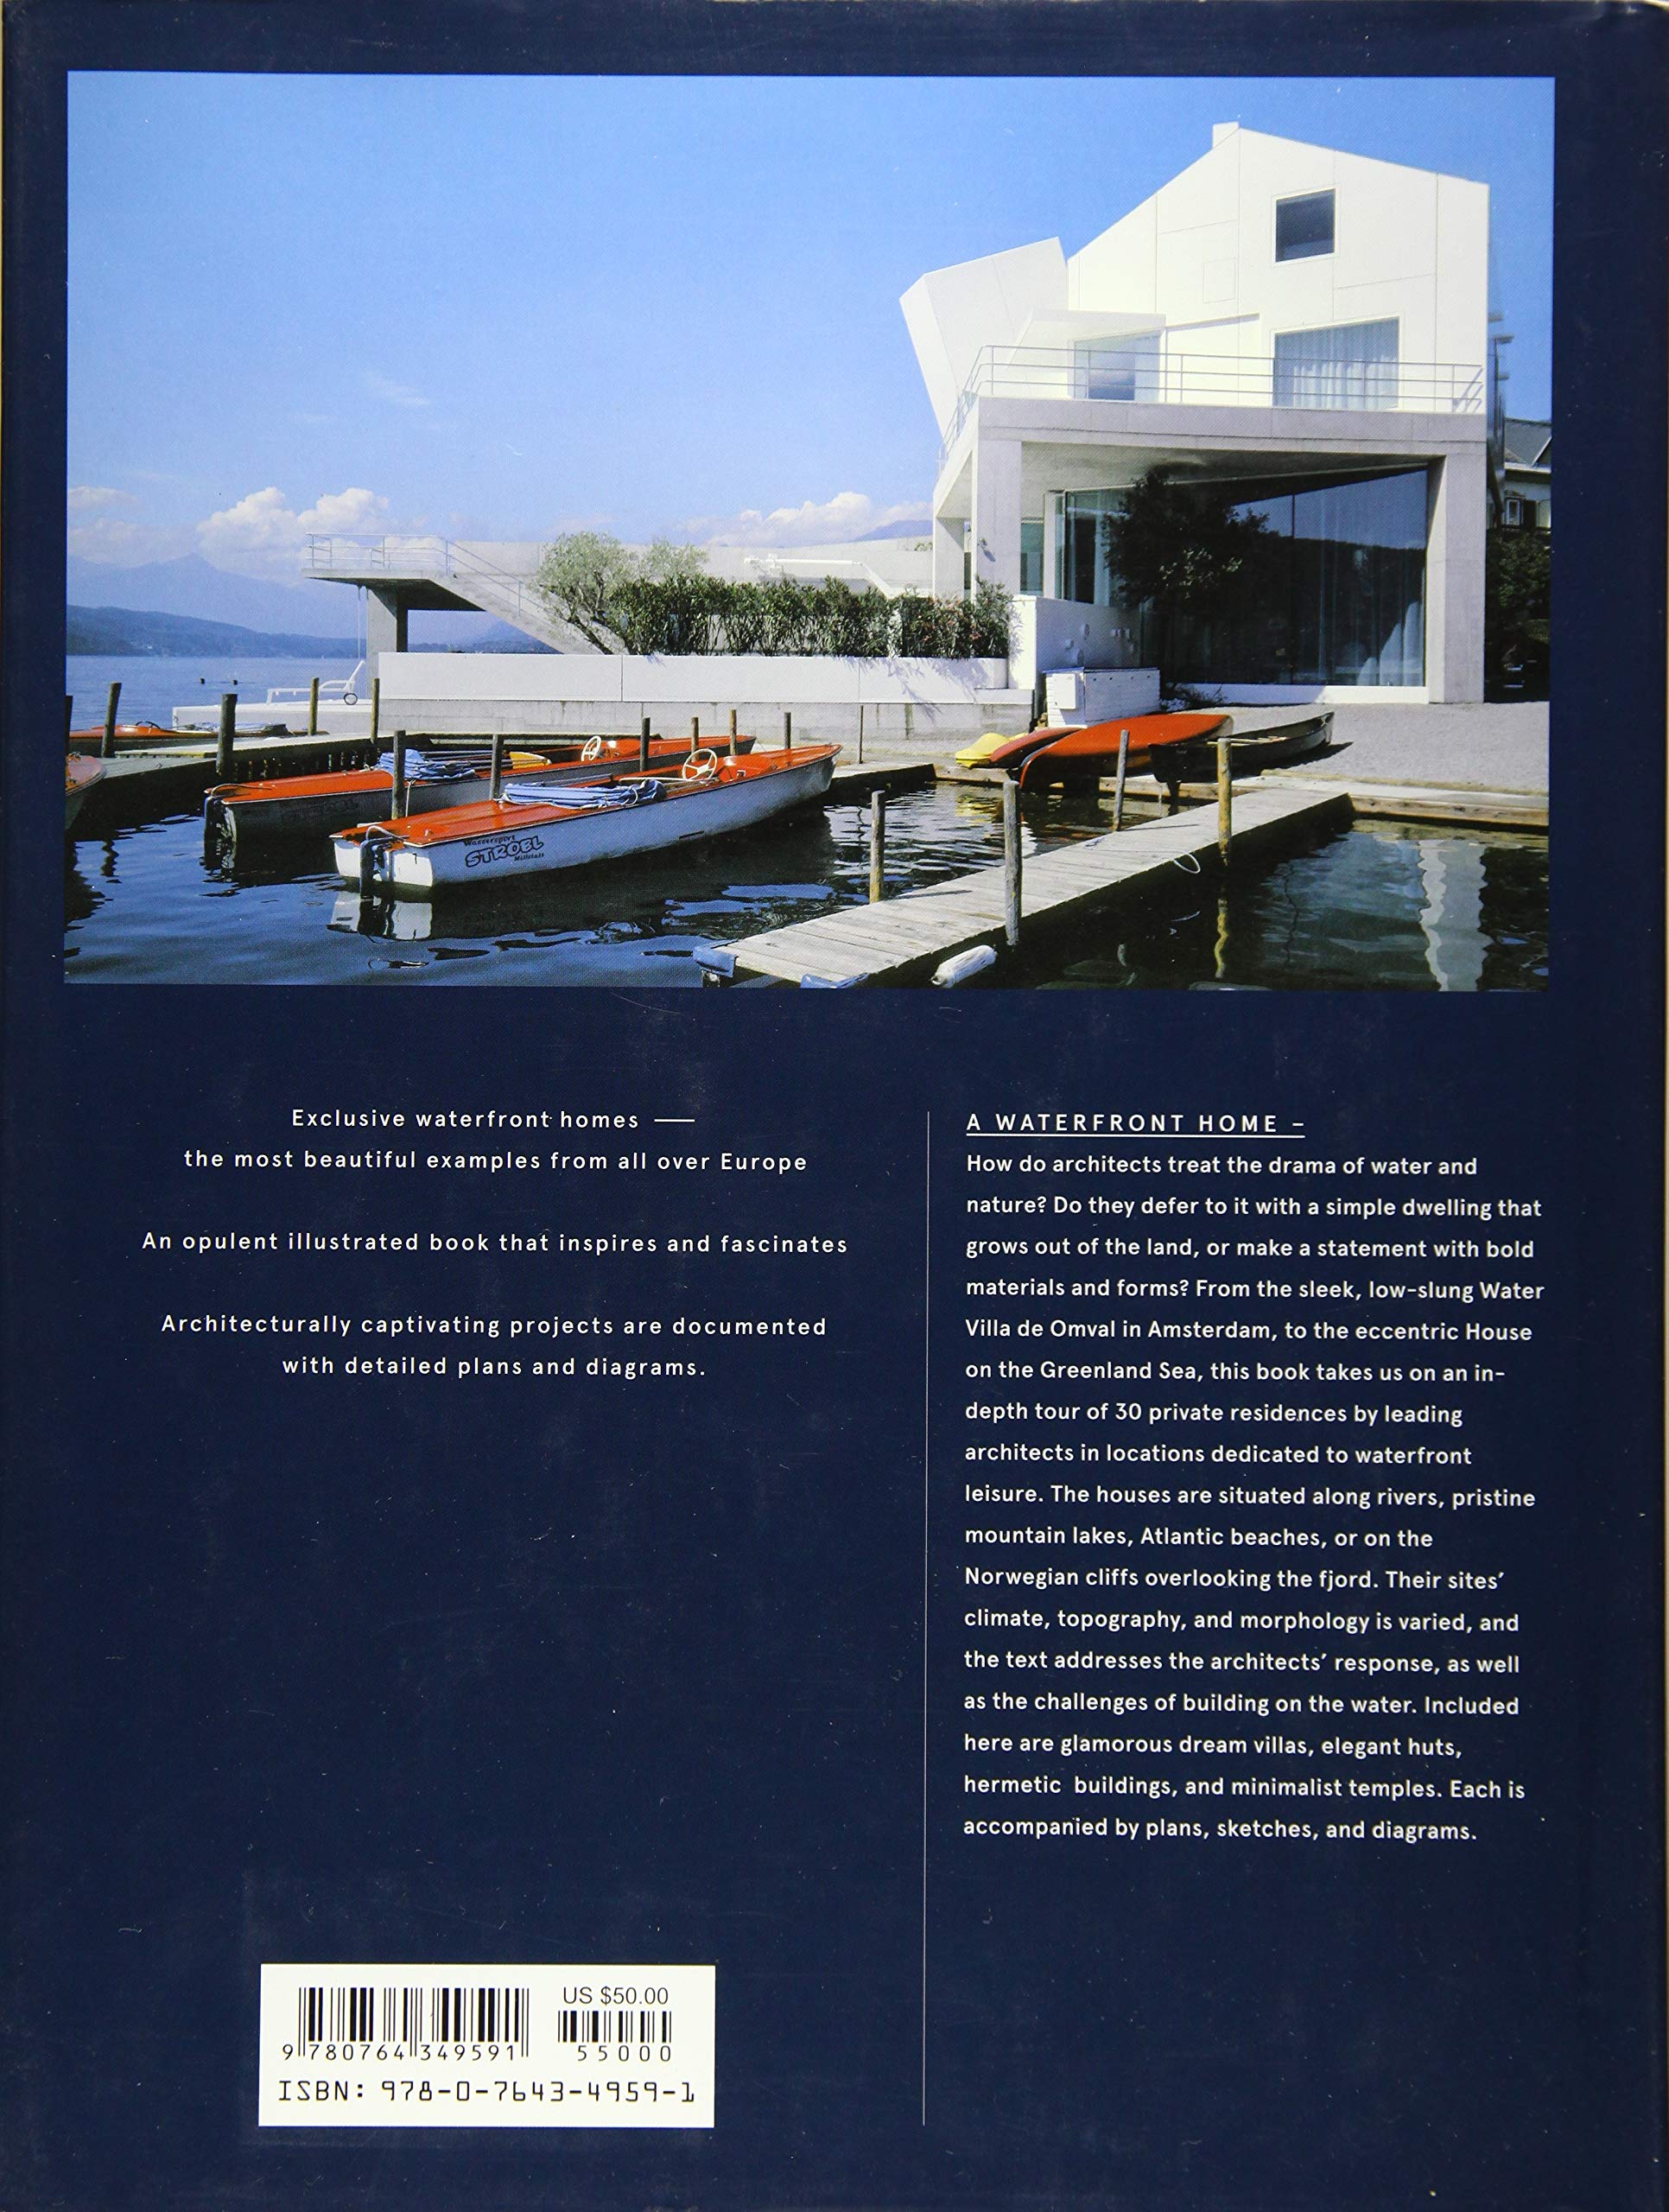 Dream Houses On The Water - The English Bookshop Kuwait